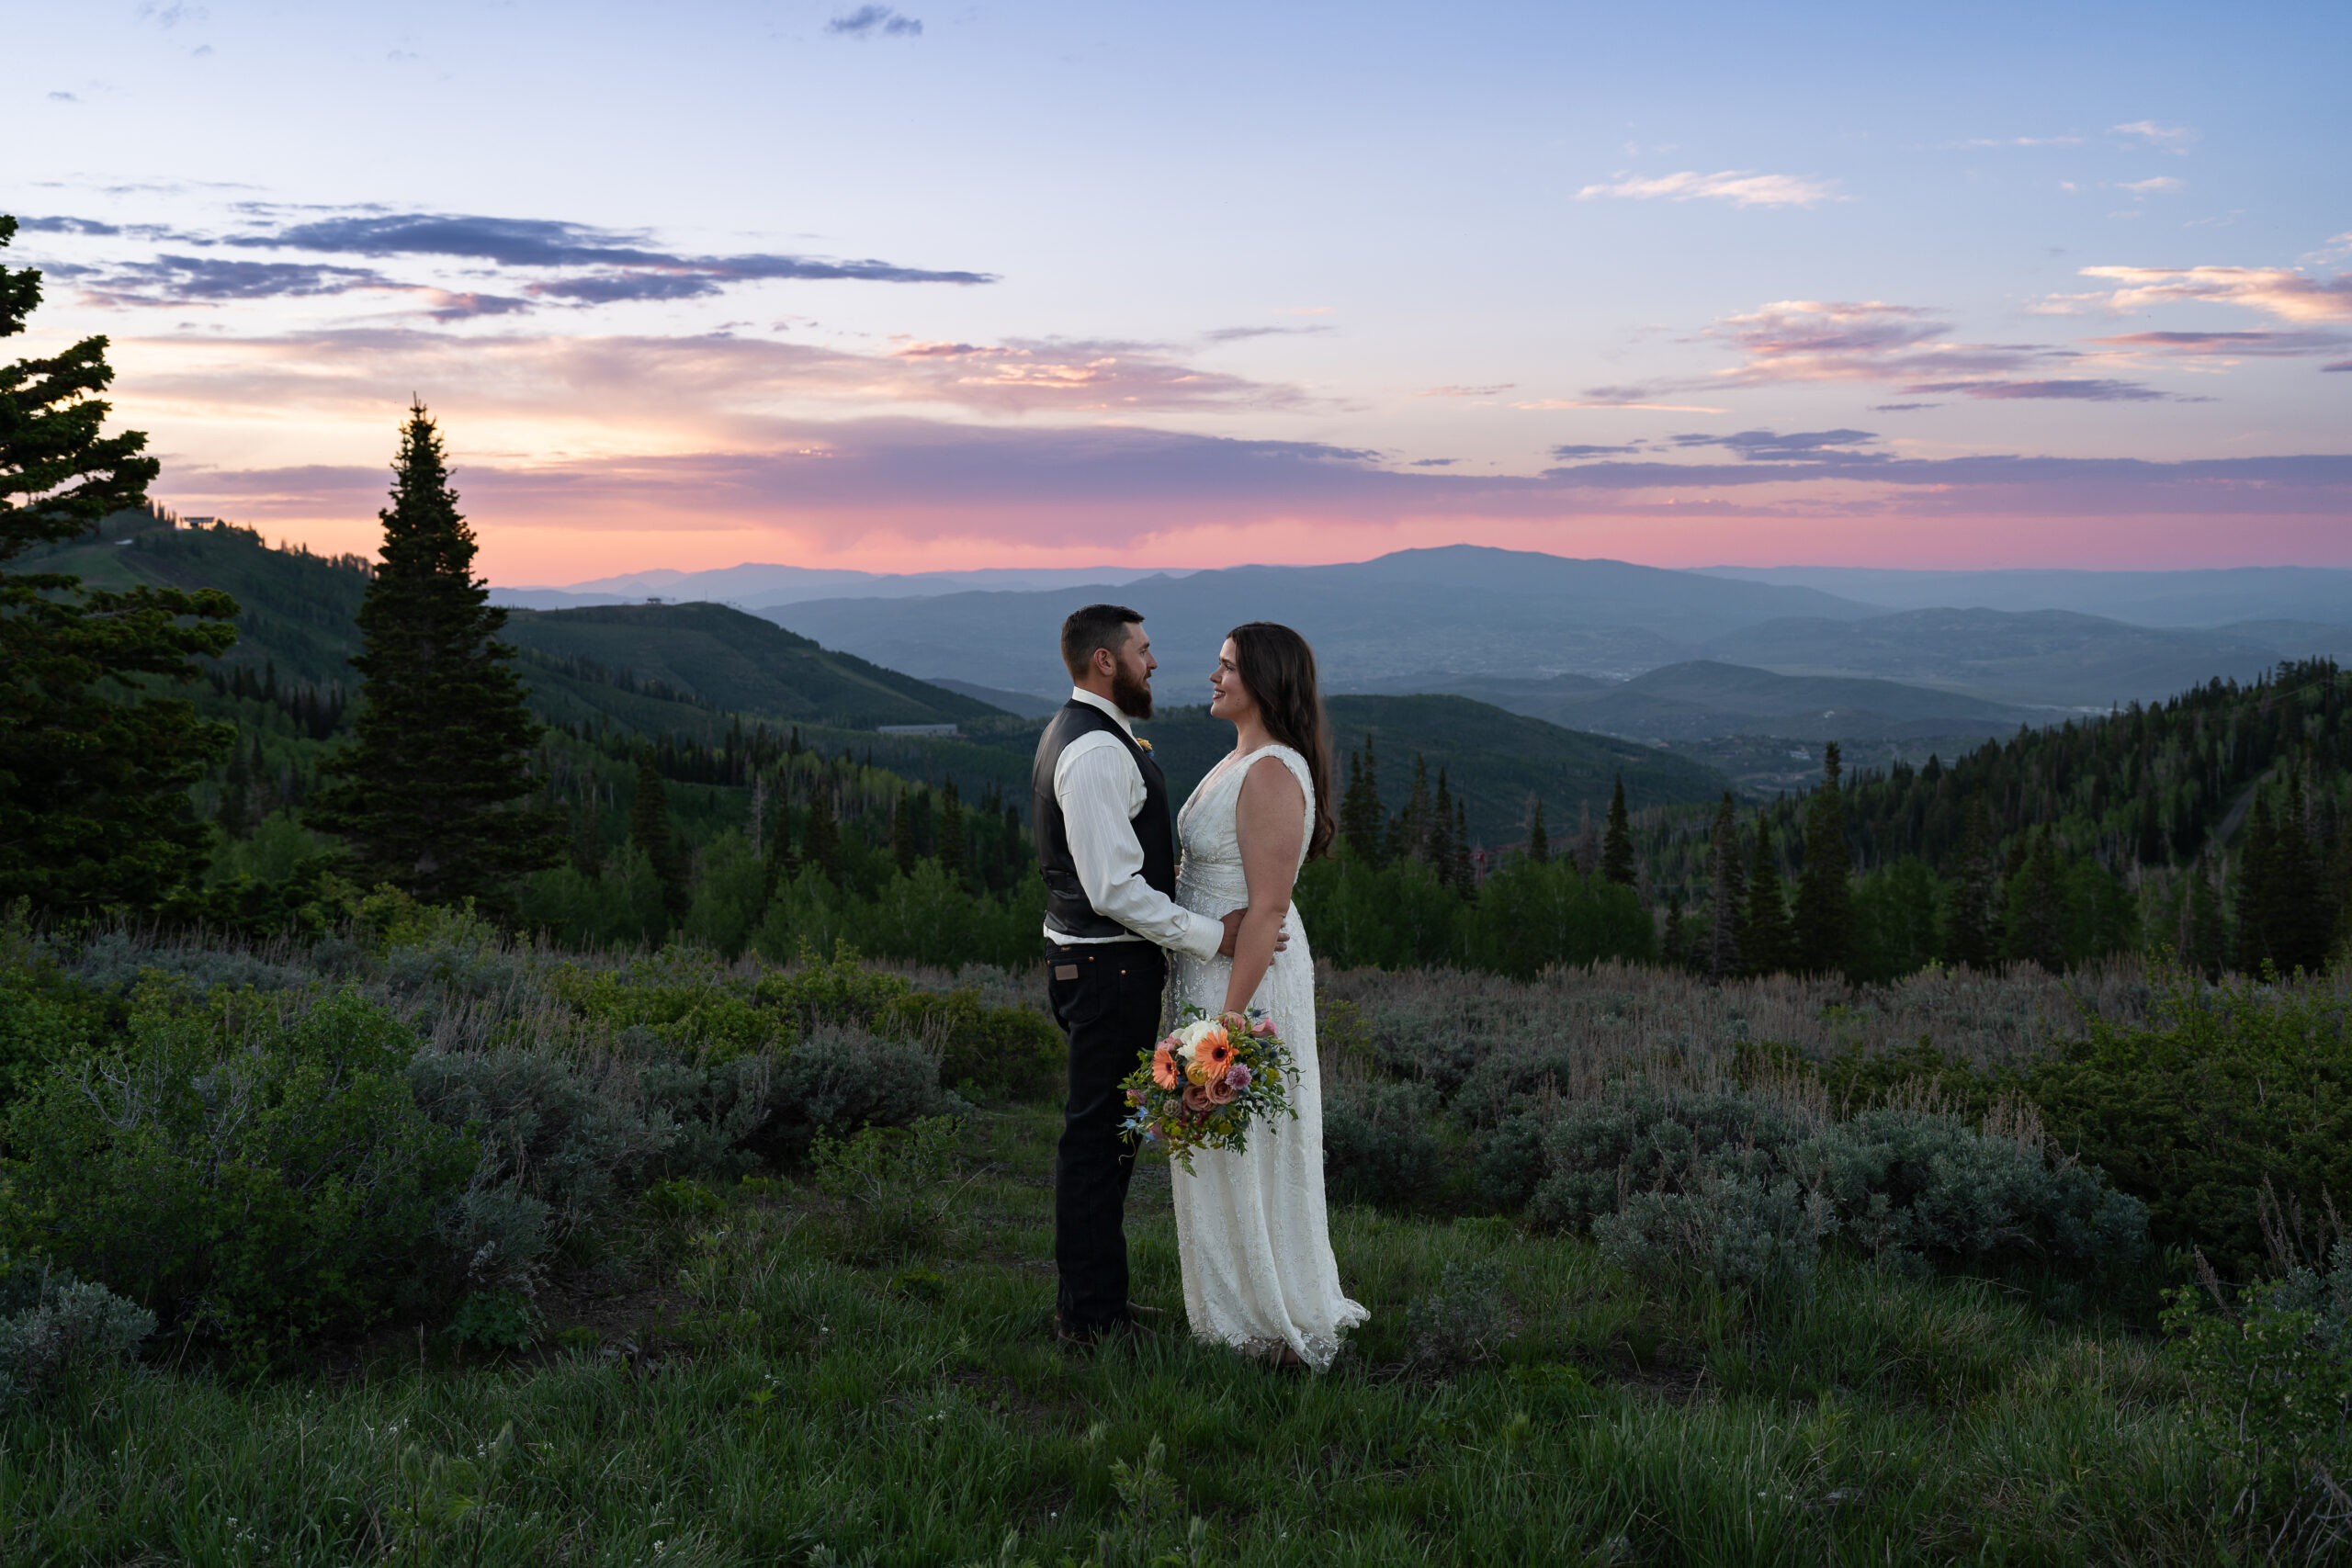 Eloping Bride and Groom standing together in front of lush green mountains at sunset in Park City, Utah